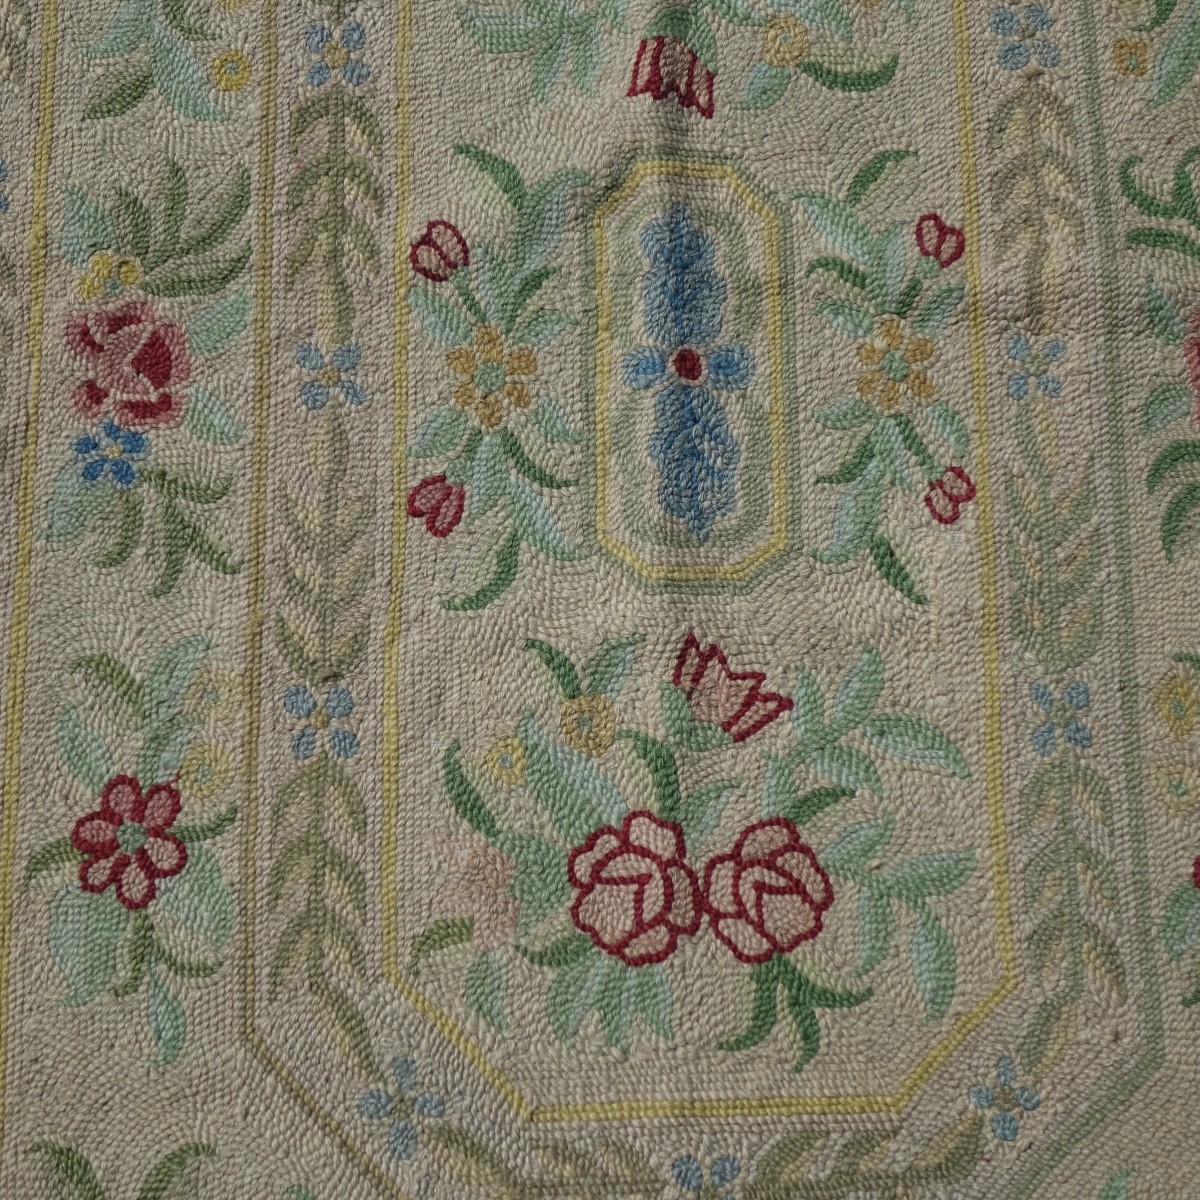 Vintage French Style Hooked Rug